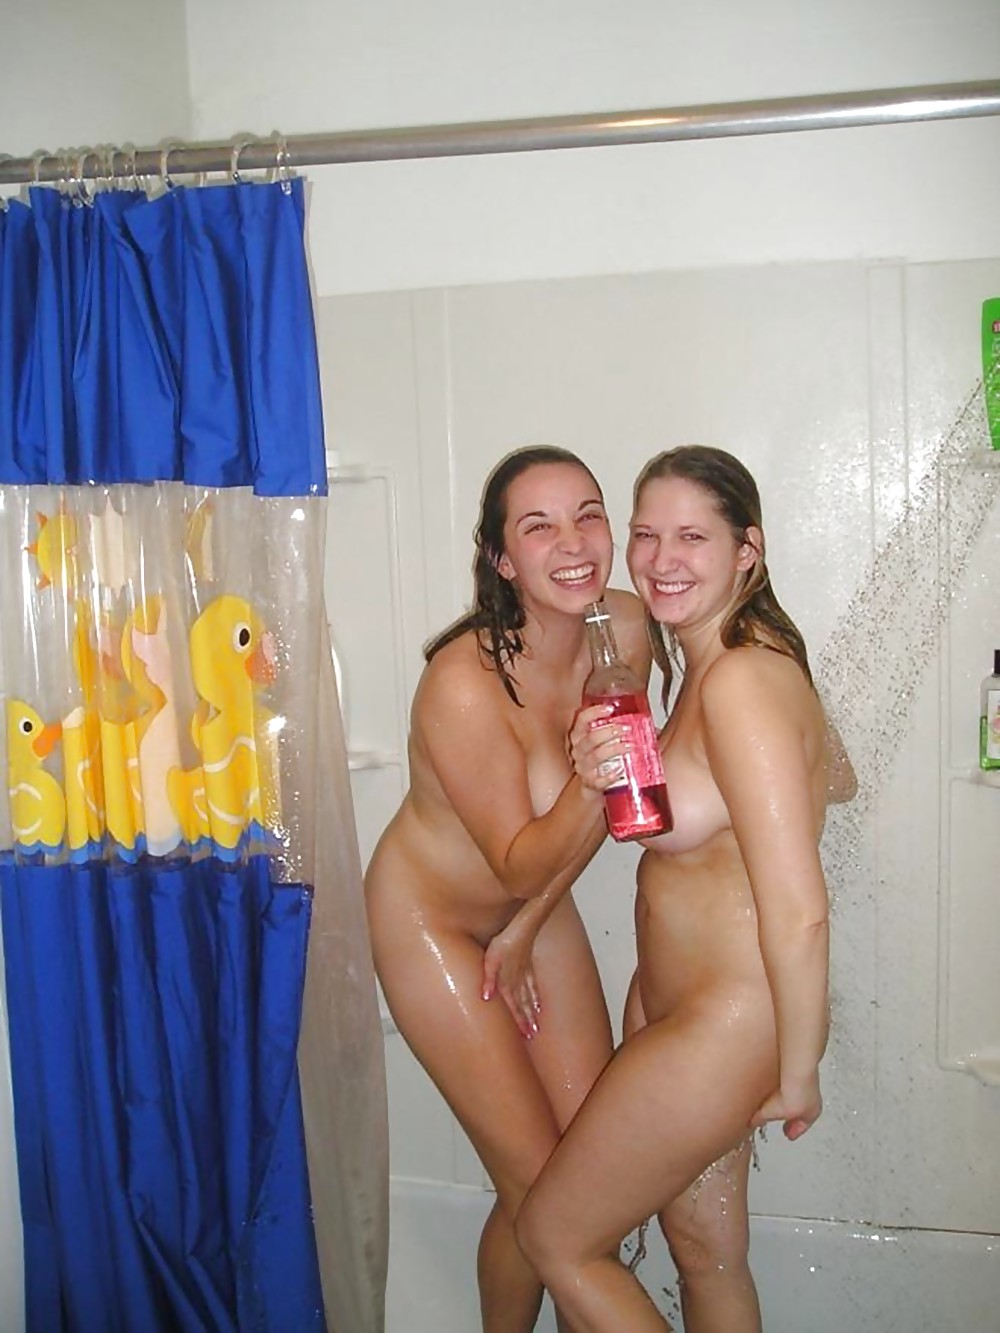 the-ass-candid-girls-nude-in-shower-brides-playboy